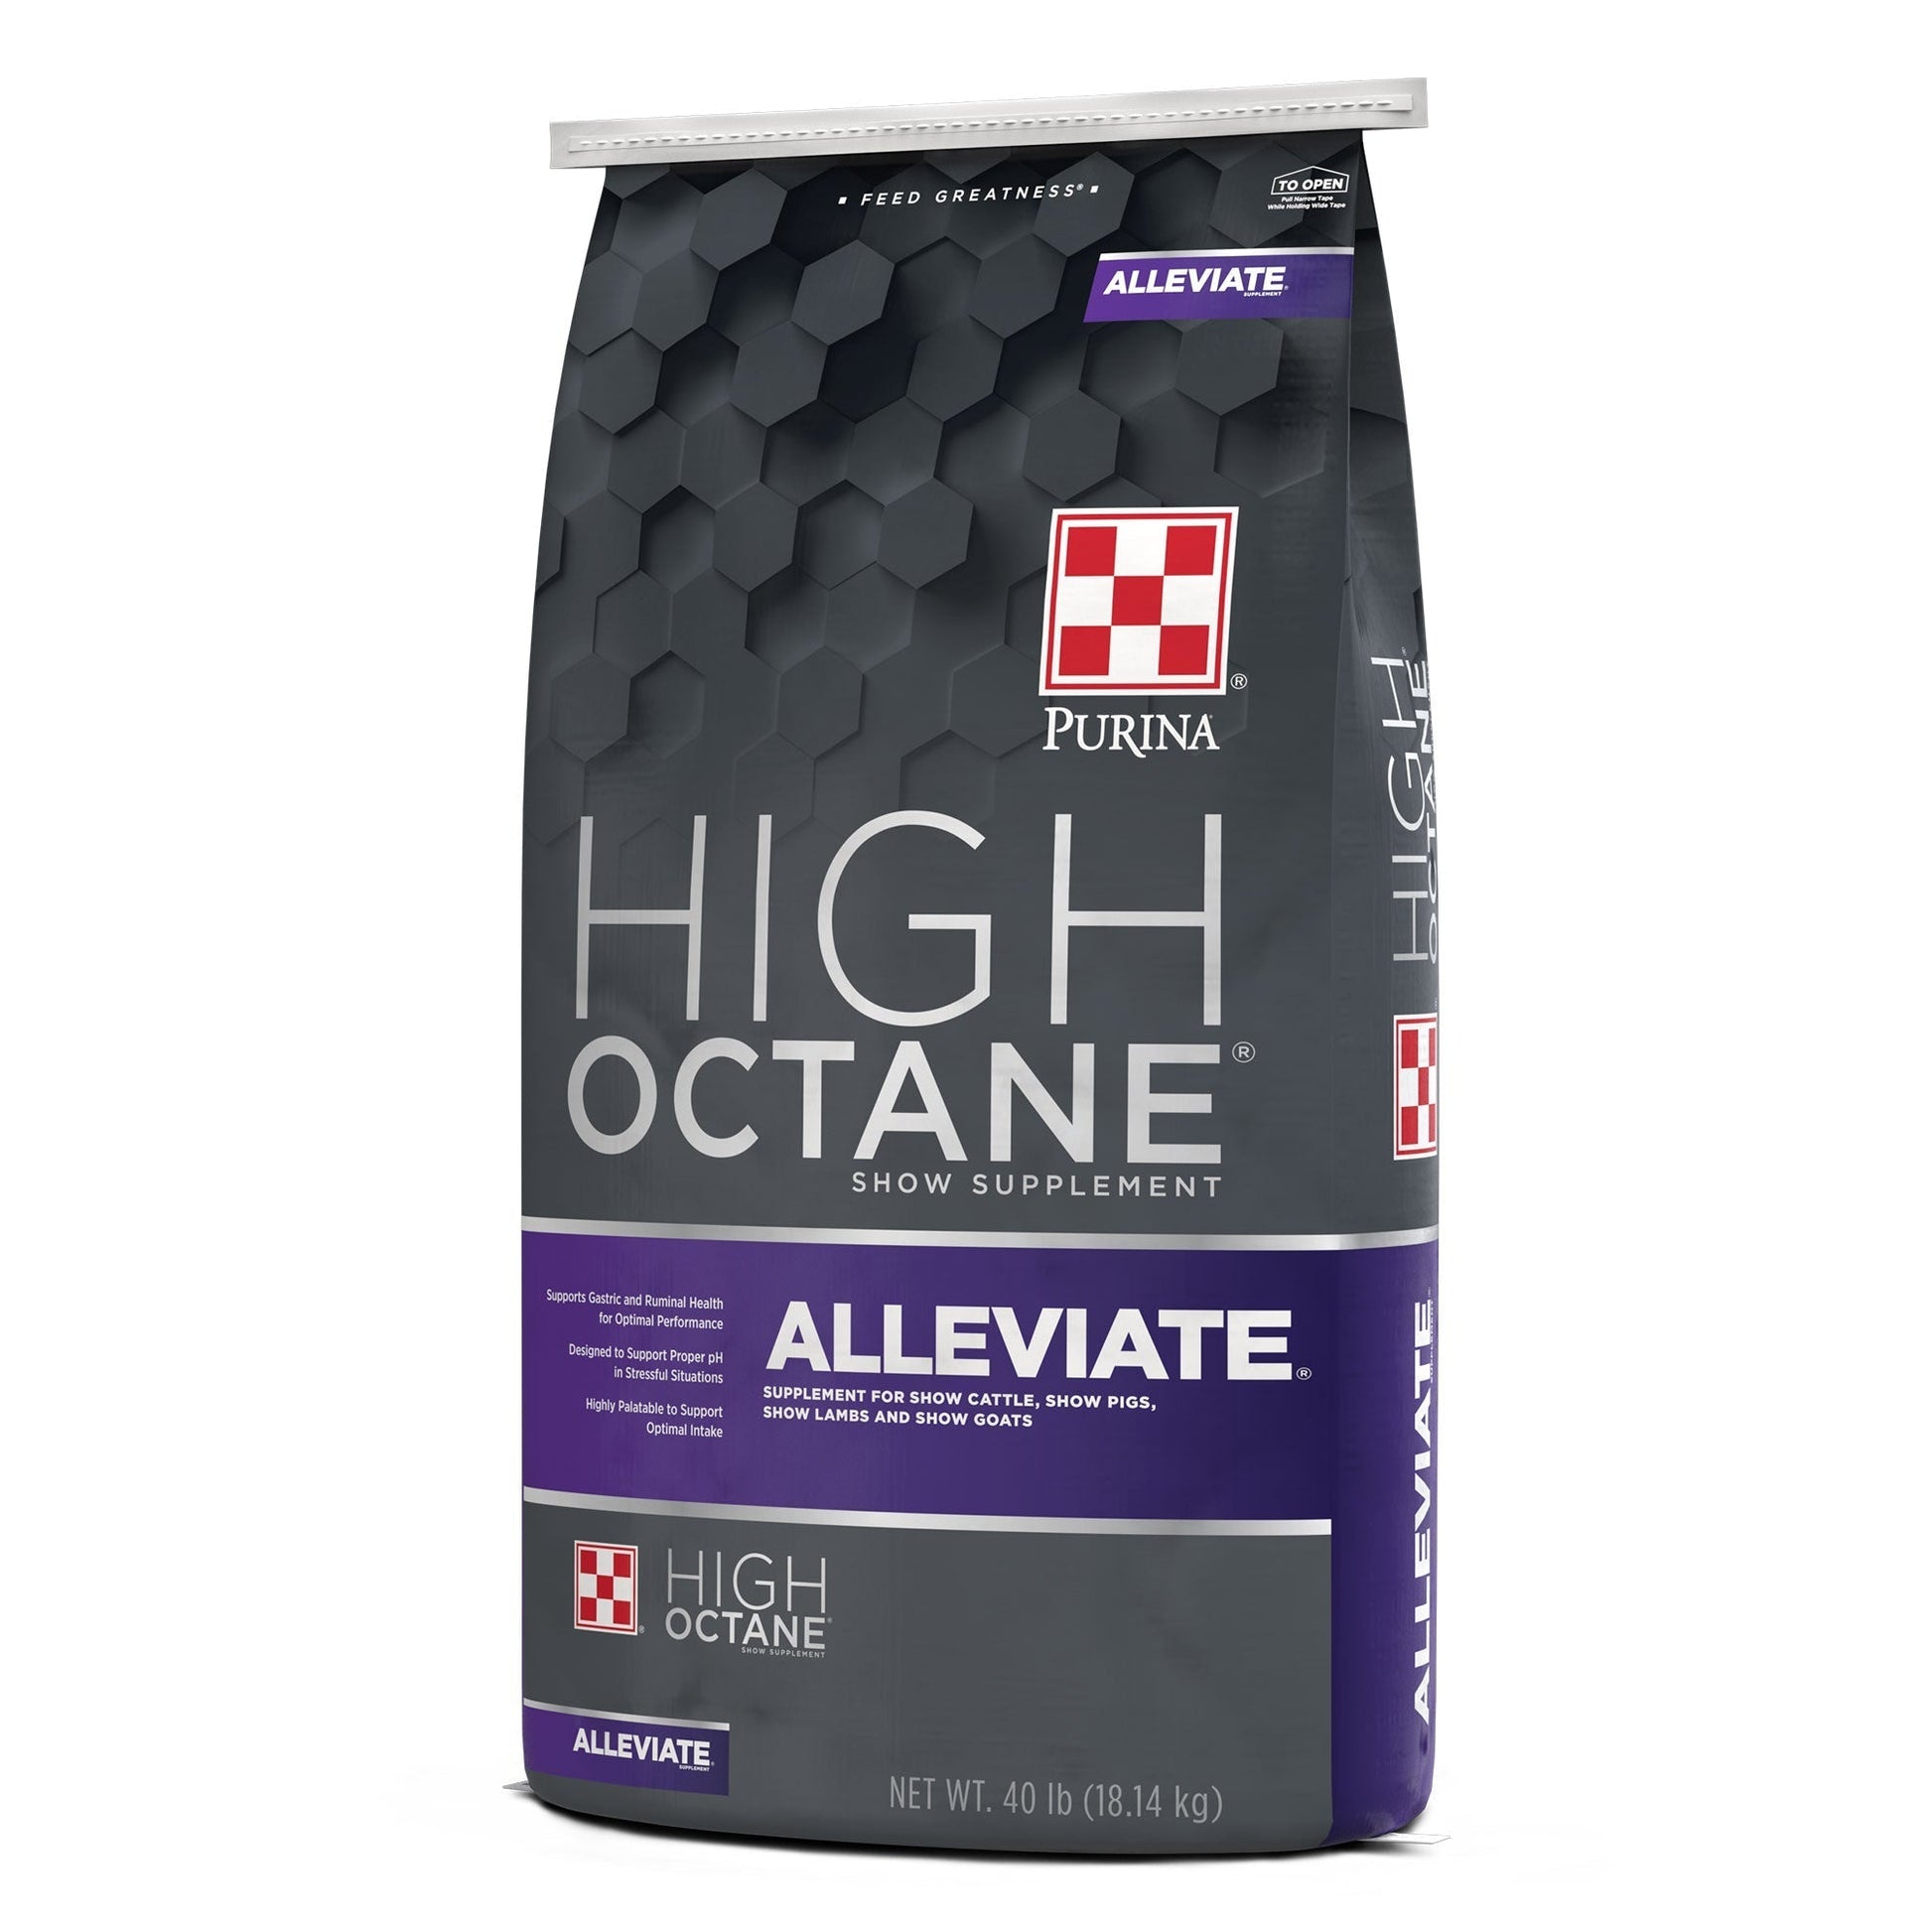 Right angle of Purina High Octane Alleviate Show Supplement